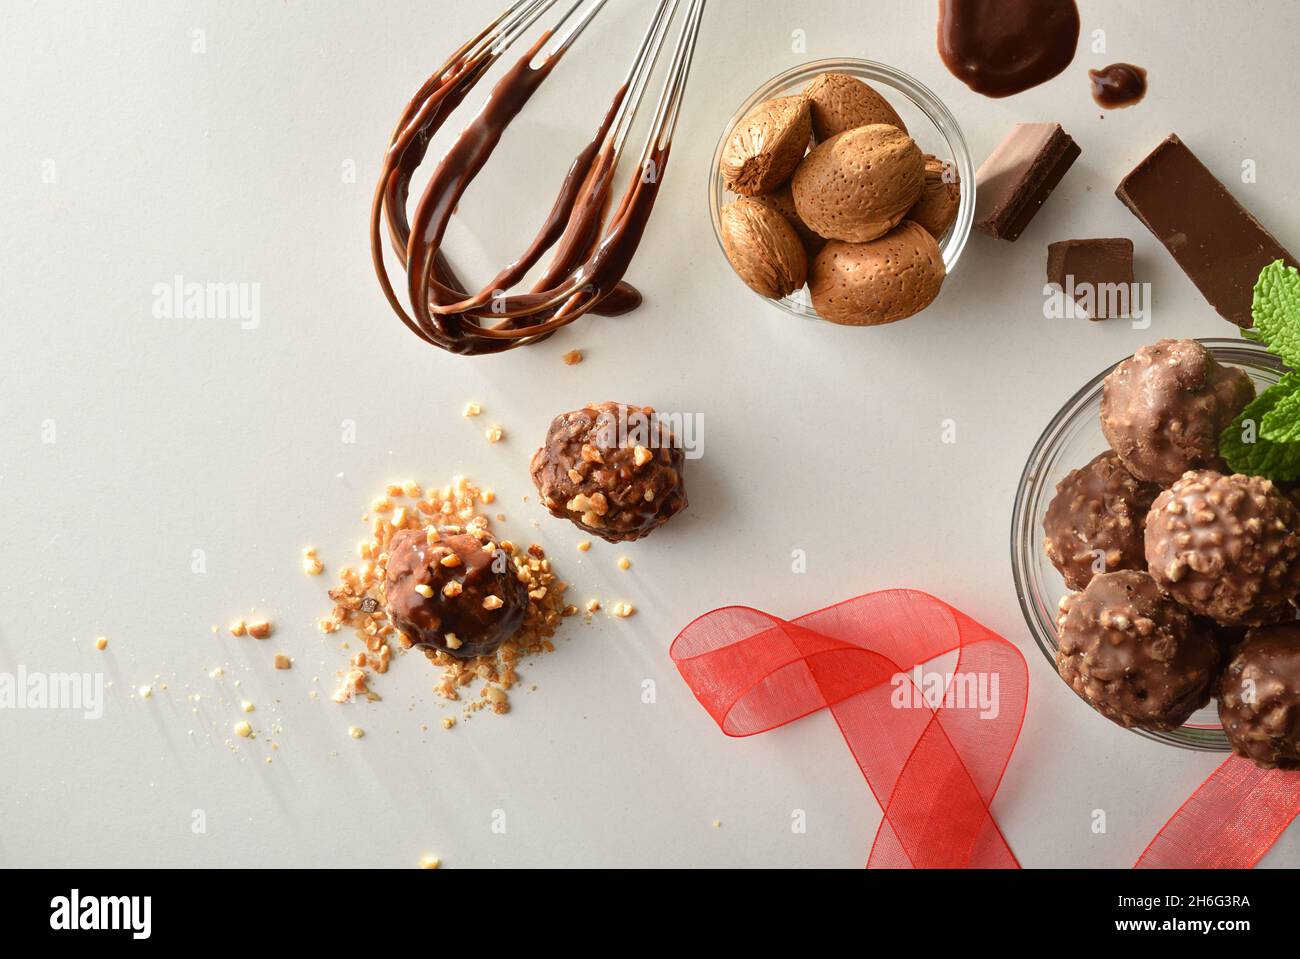 Preparing chocolate balls with almond chips on a white bench with kitchen tools. Top view. Horizontal composition. Stock Photo